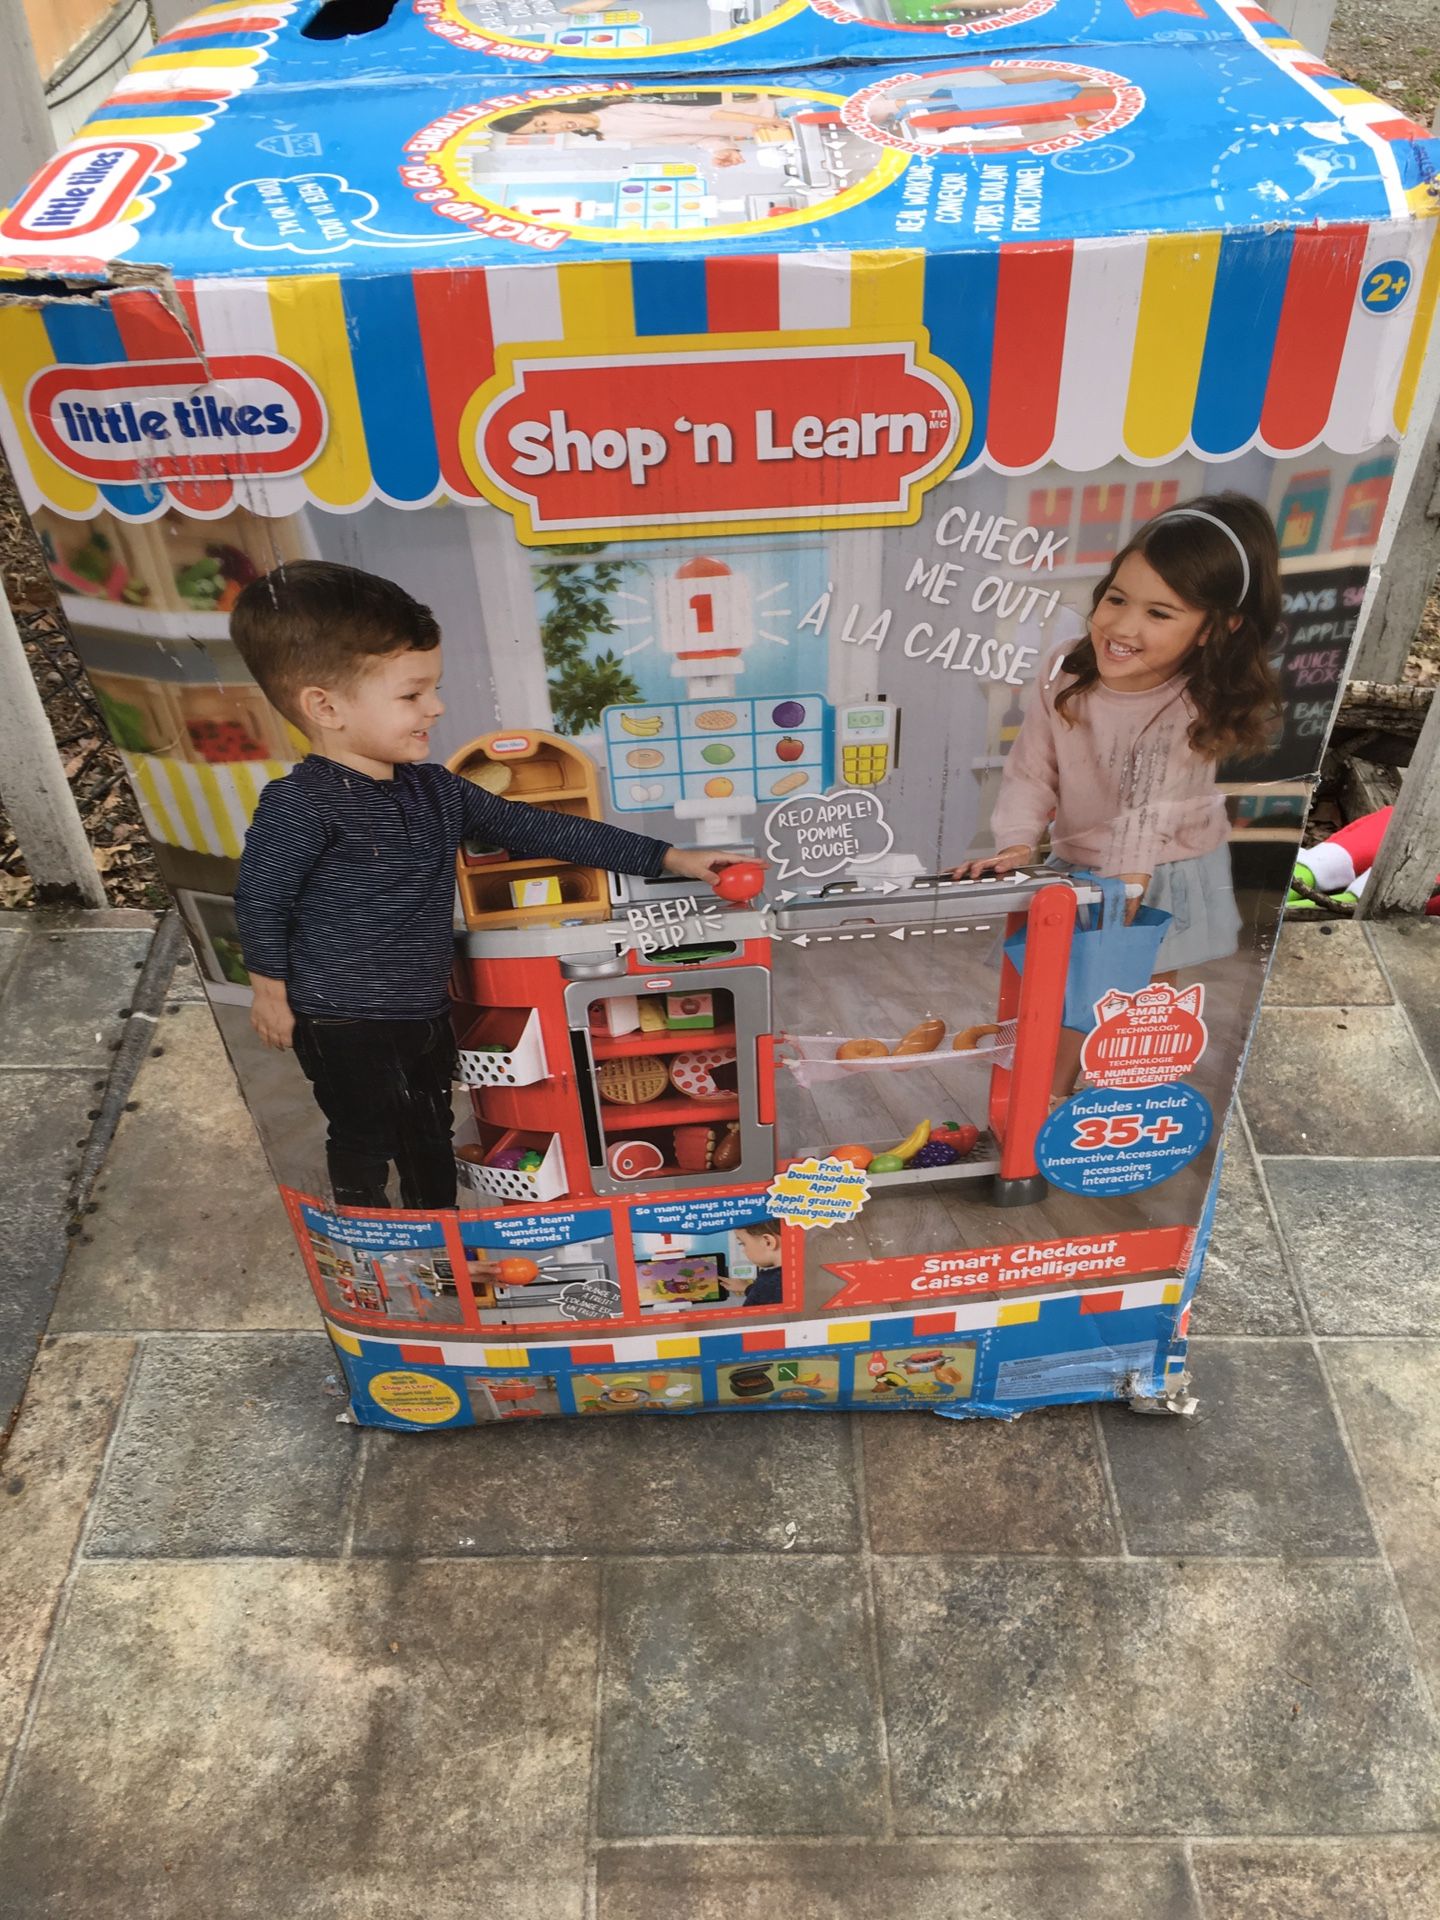 Little tikes Shop and learn brand new